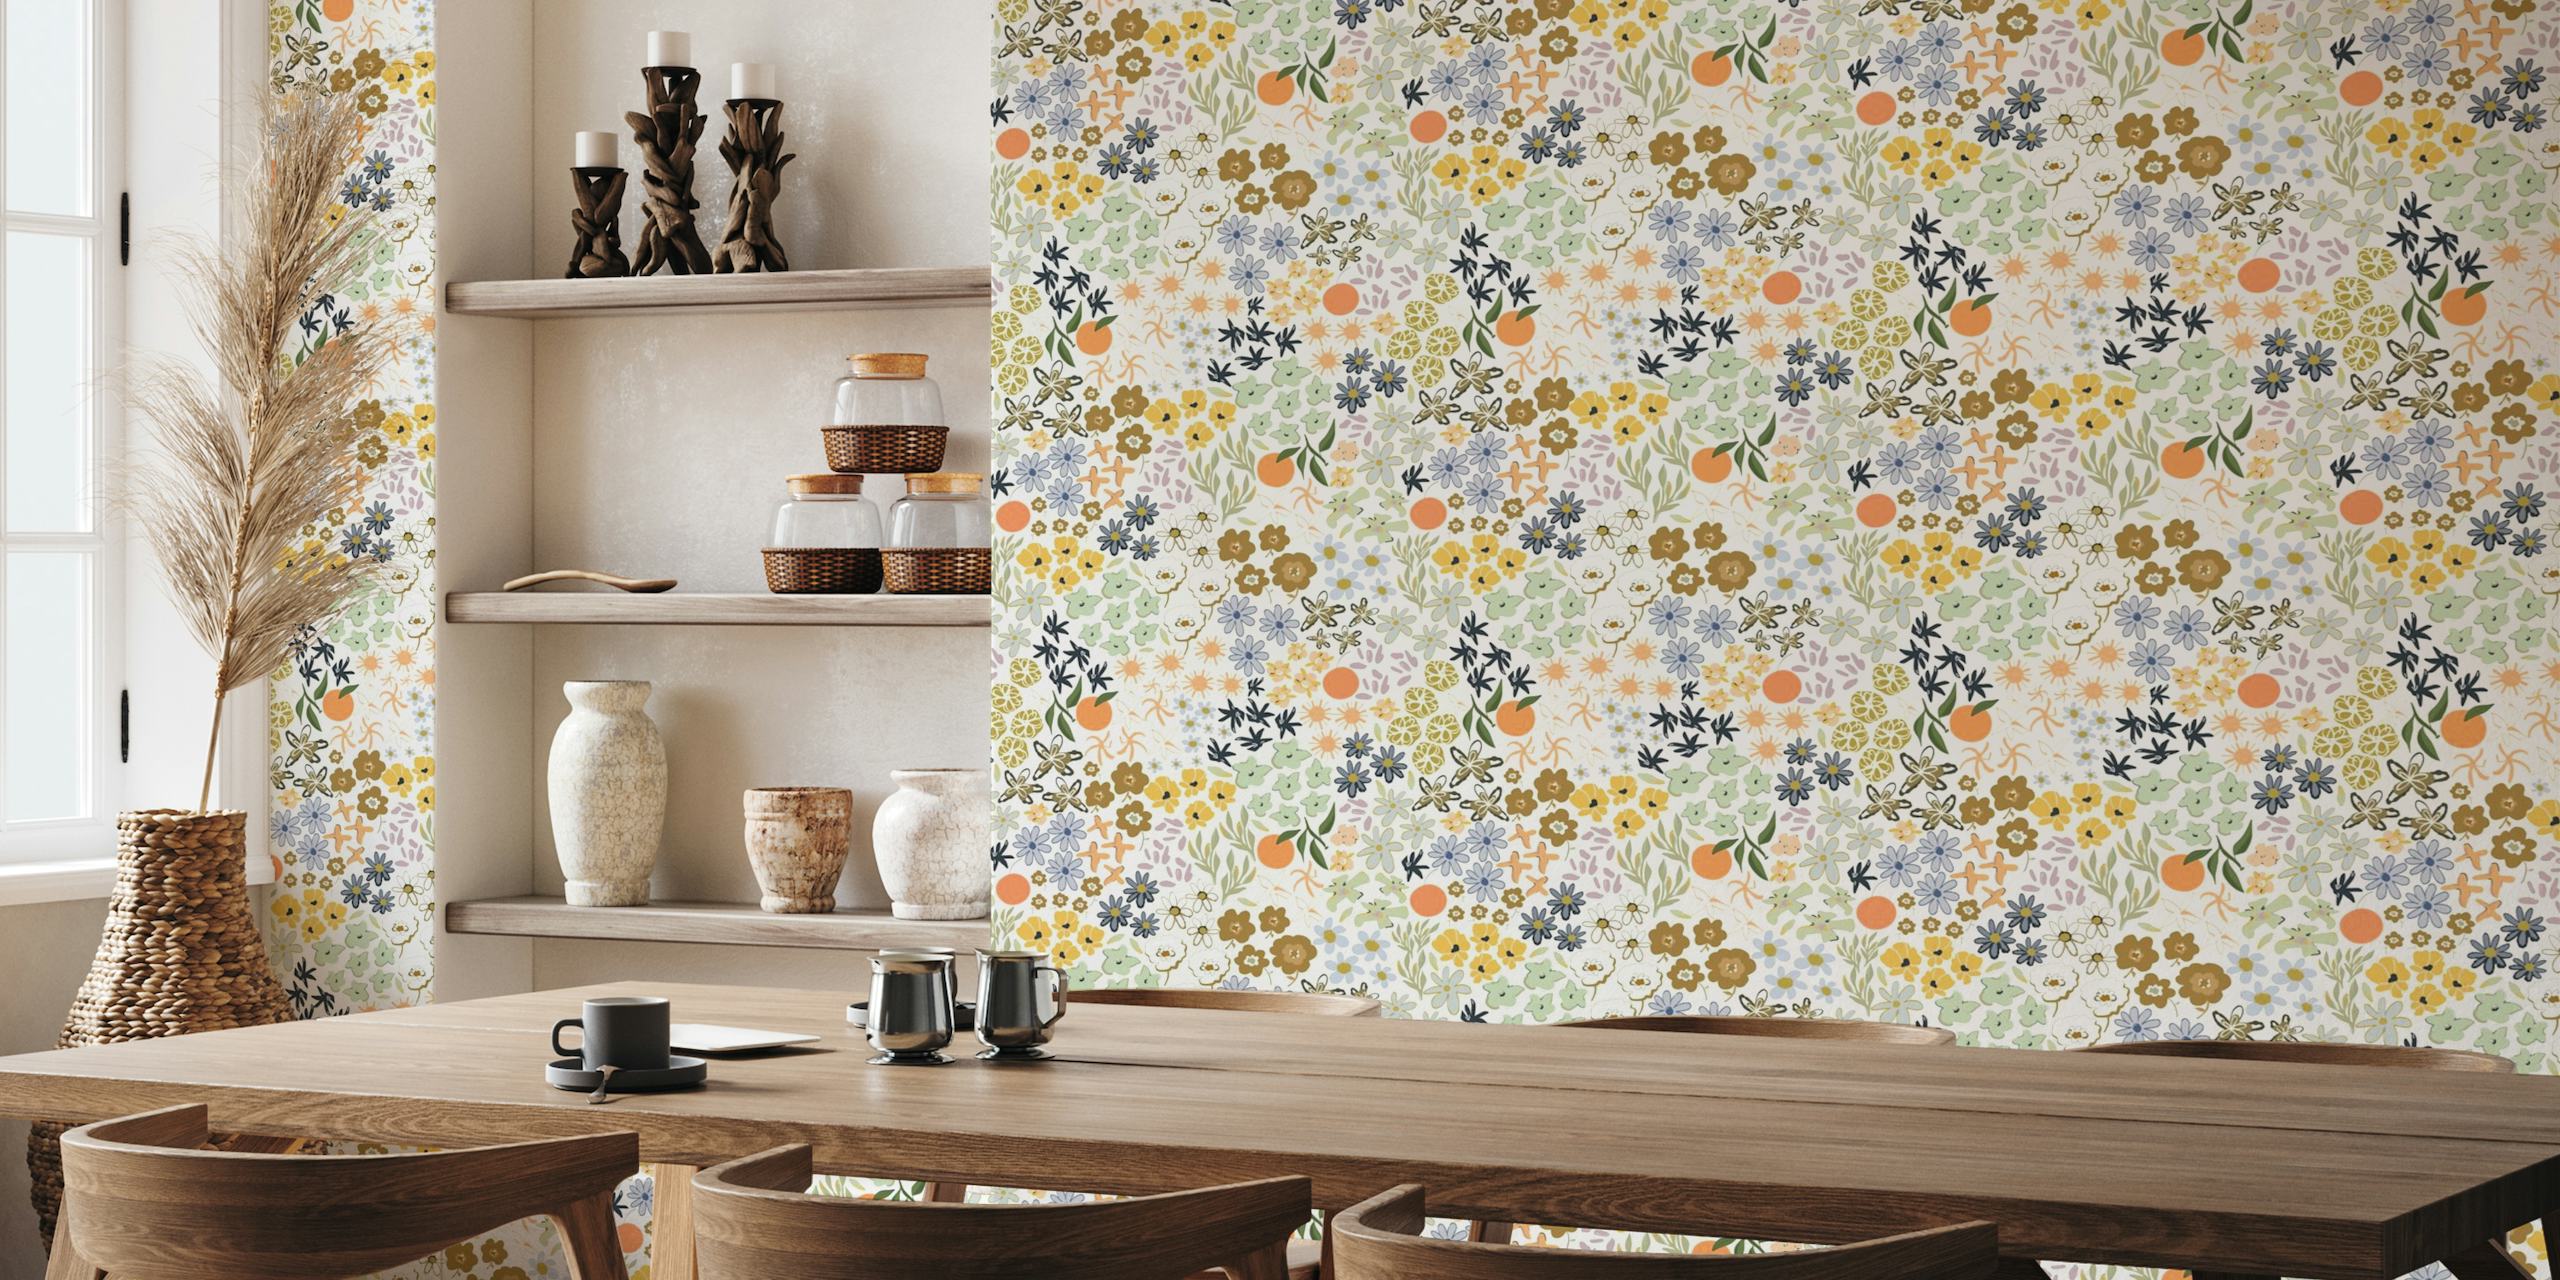 Ditsy colorful pattern with oranges wallpaper